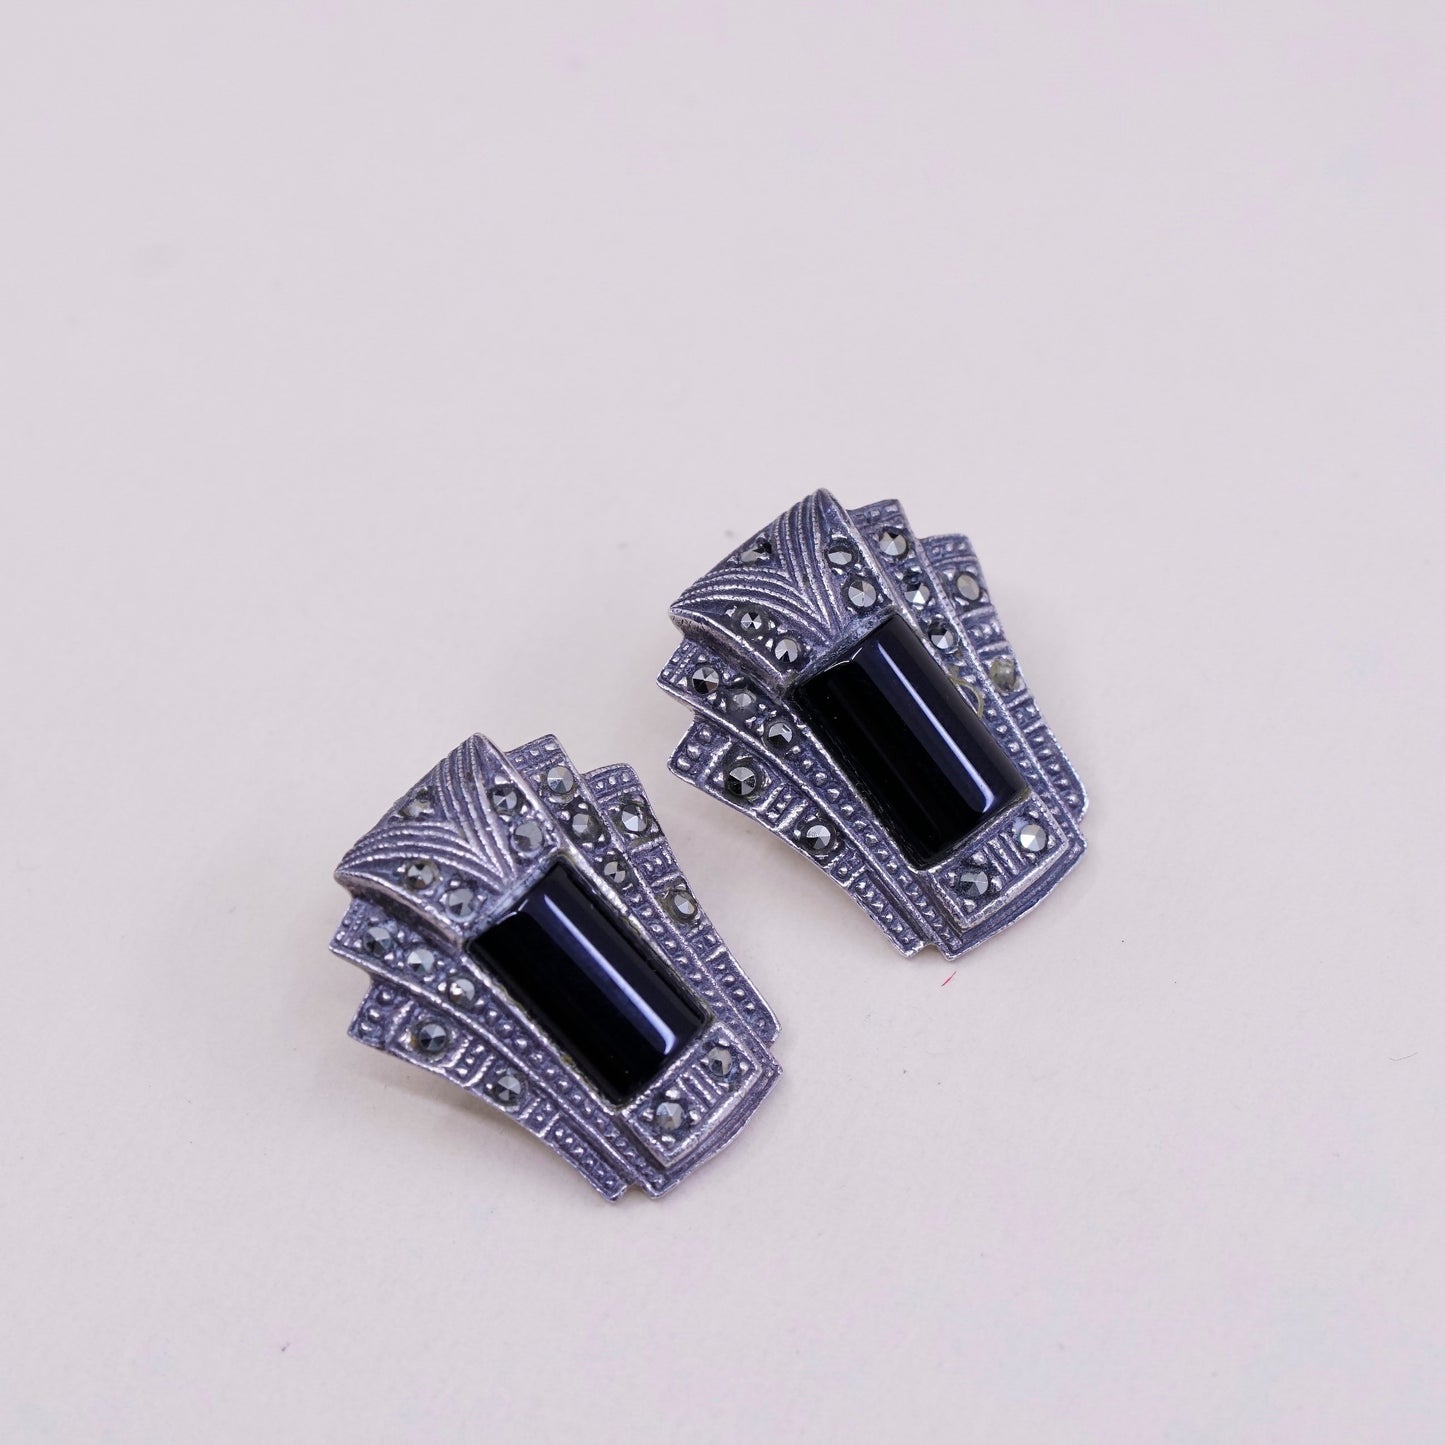 Vintage Judith Jack Sterling 925 silver earrings with Marcasite and obsidian